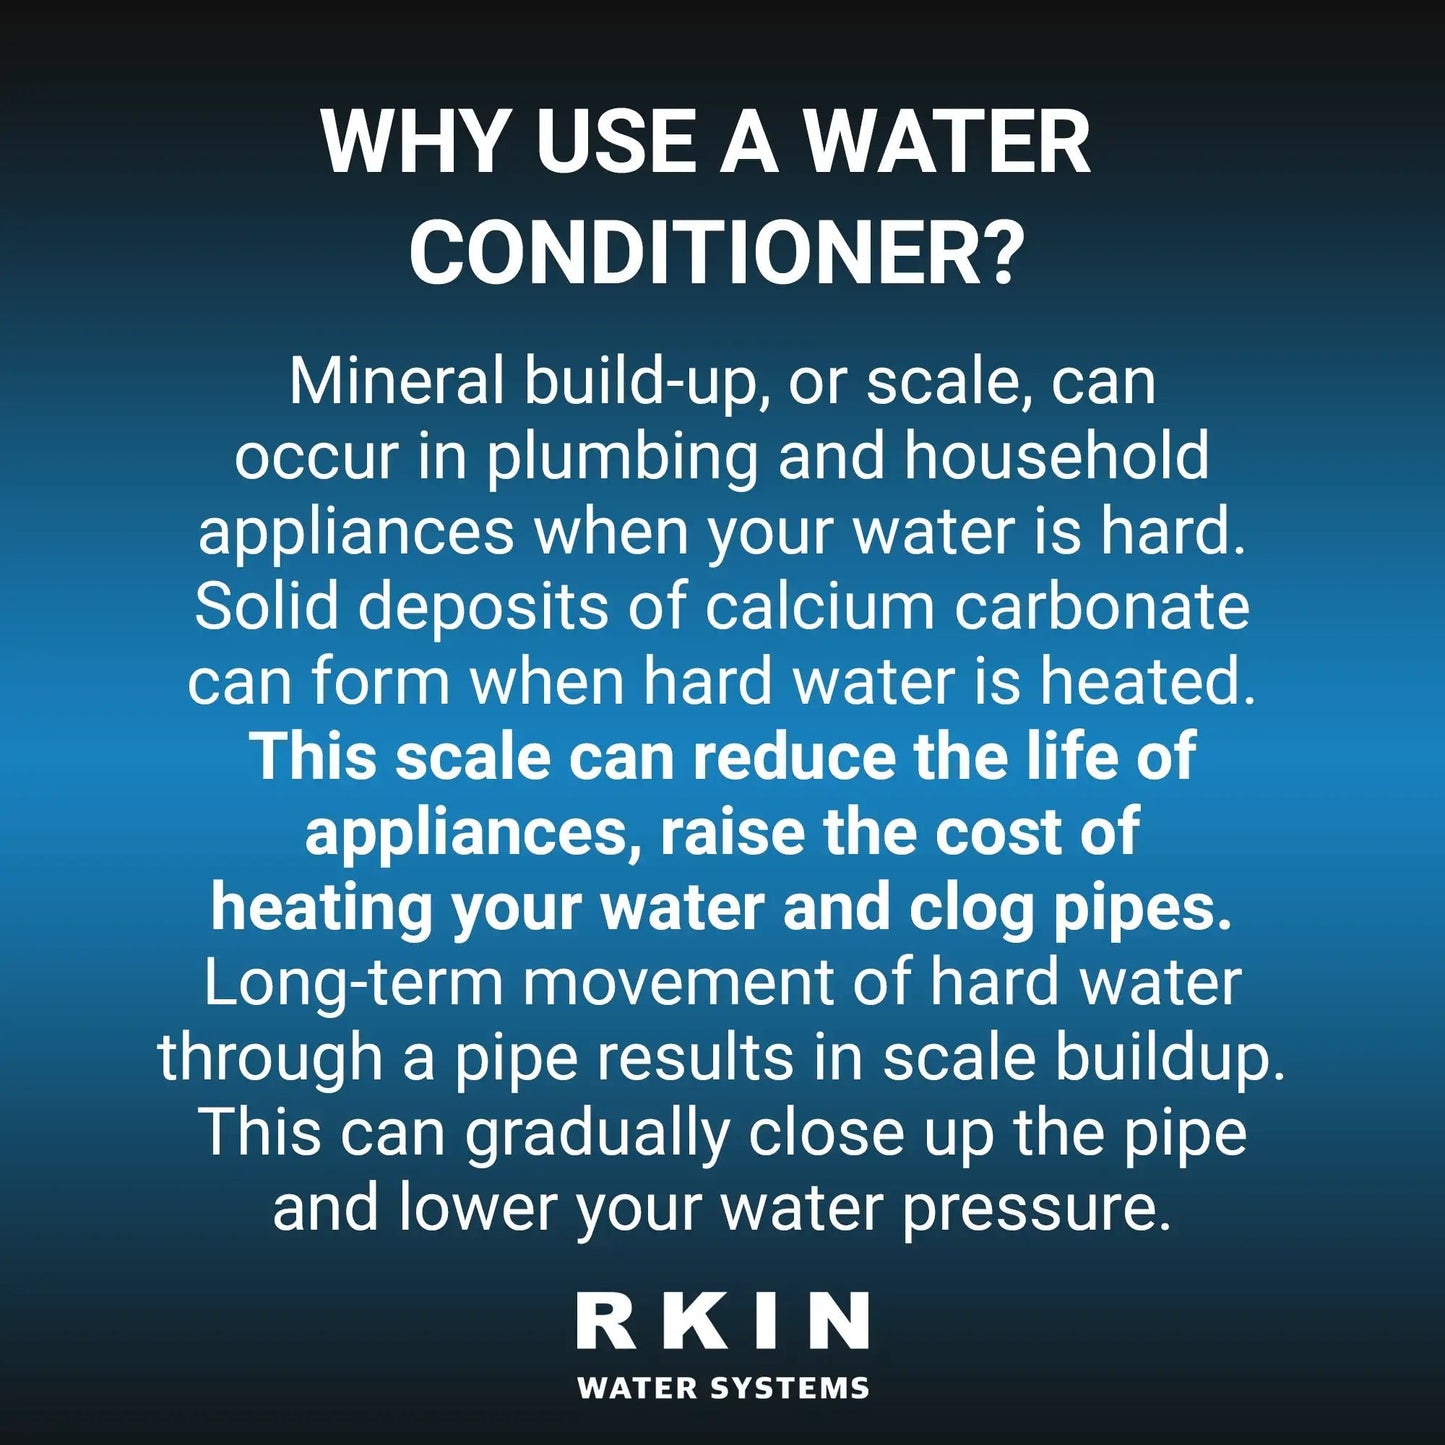 Salt Based Water Softener and Whole House Carbon Filter System - RKIN